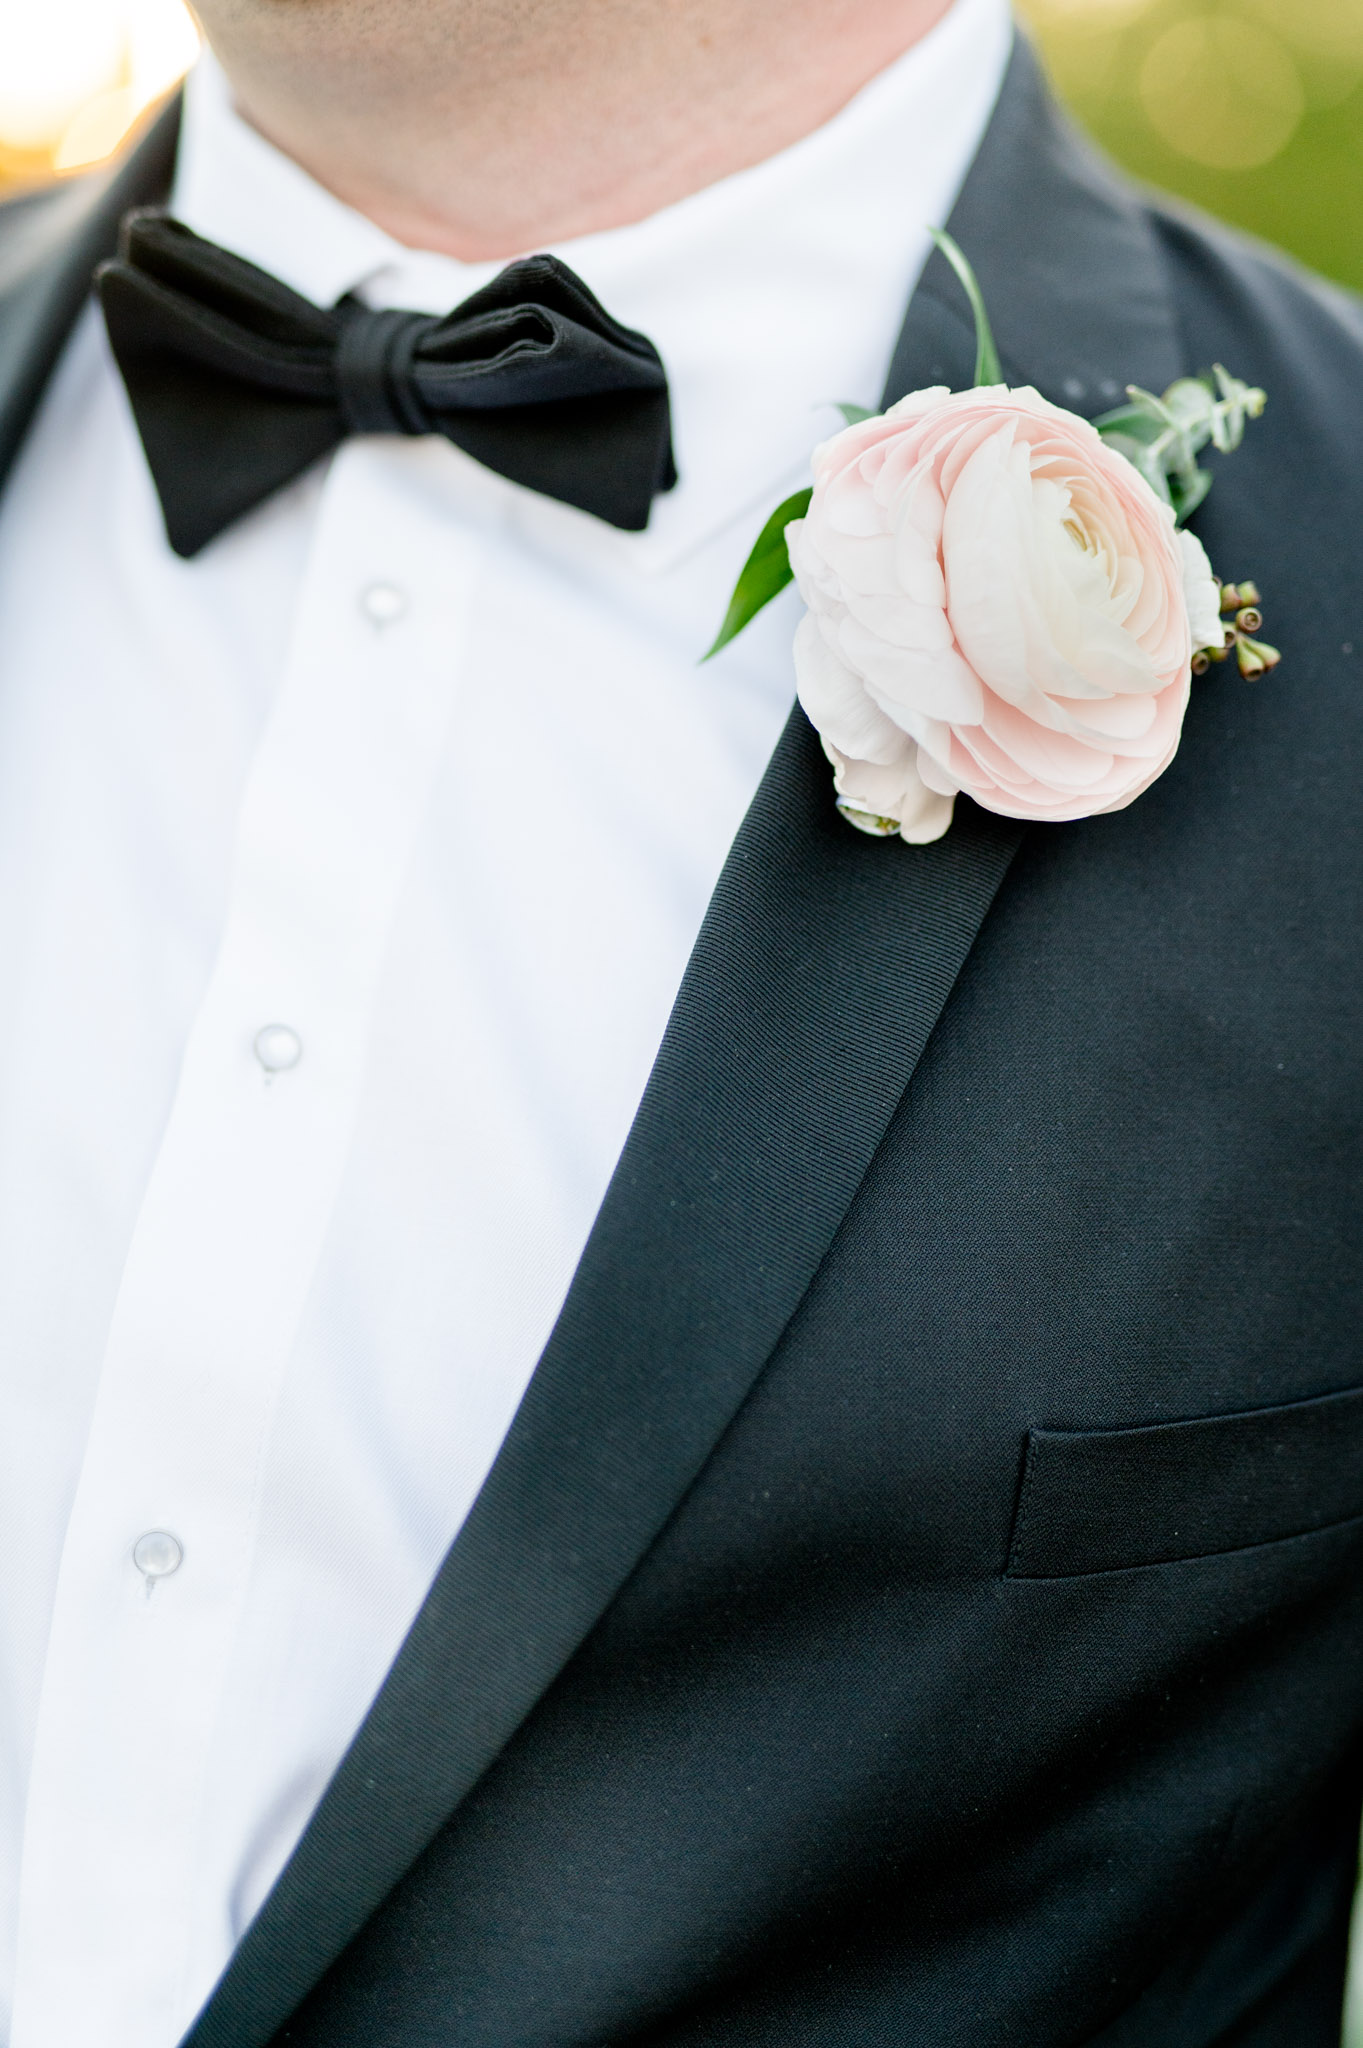 Pink flower boutonniere pinned on groom's lapel.